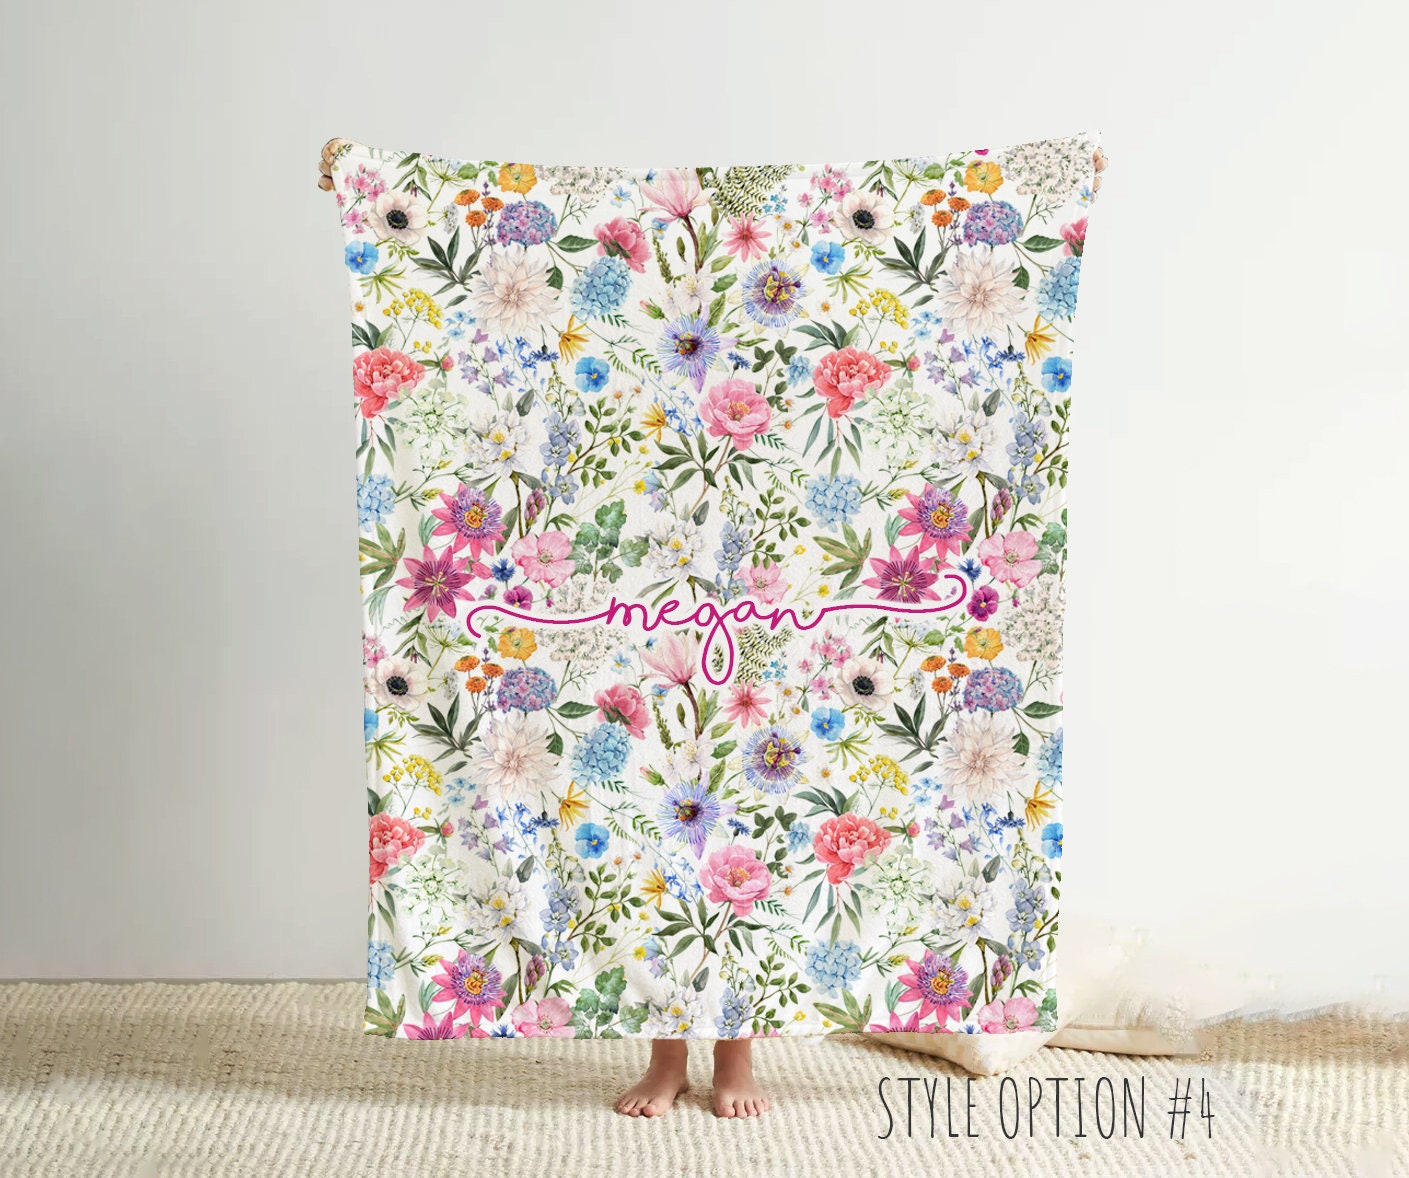 Personalized Watercolor floral in vintage rustic style blanket with Name, Custom blanket gift, Birthday Anniversary Gift